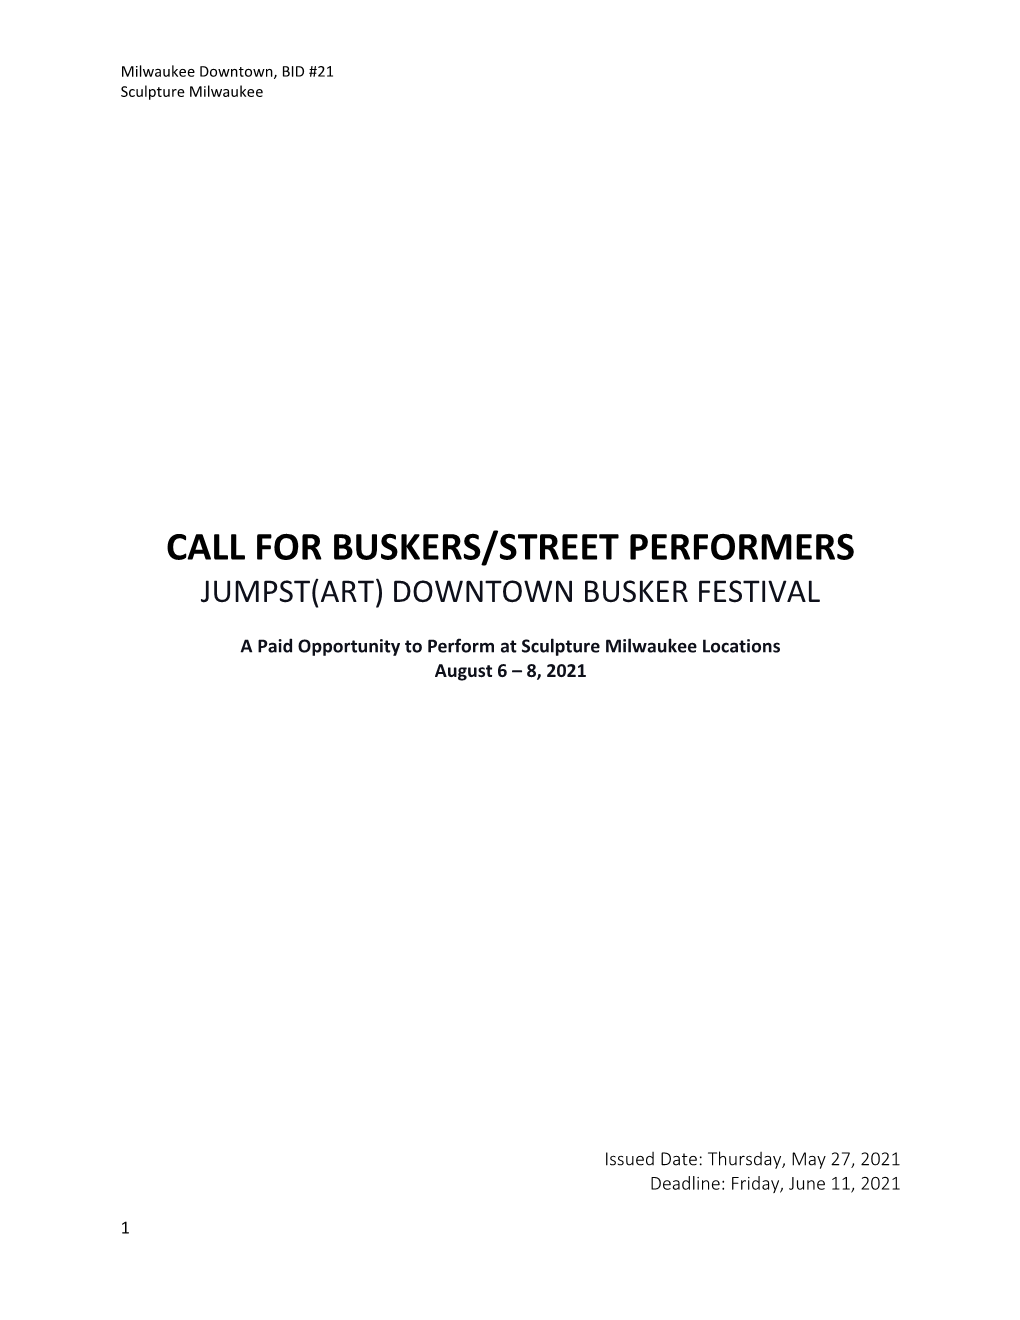 Call for Buskers/Street Performers Jumpst(Art) Downtown Busker Festival